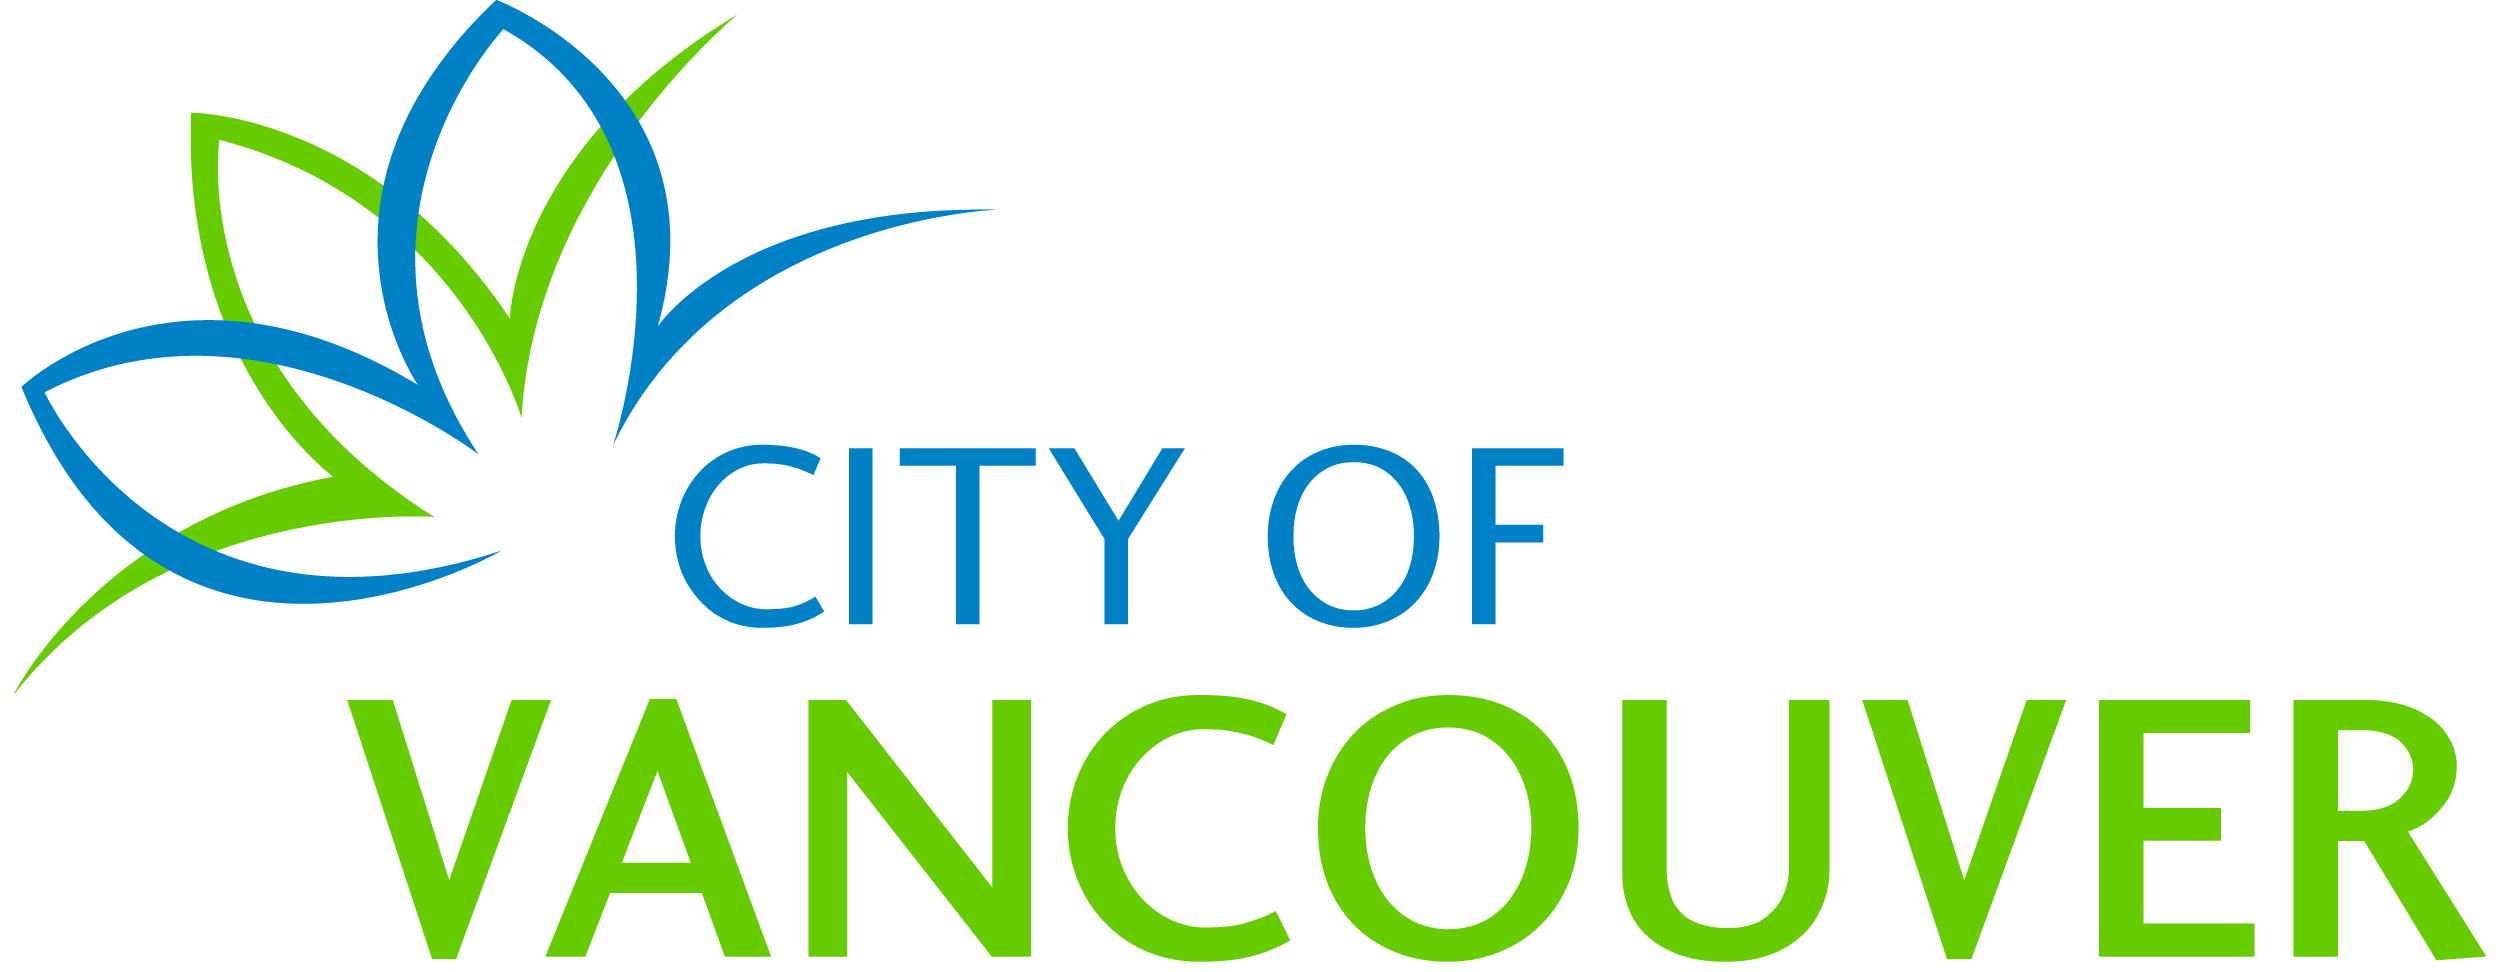 City of Vancouver Water Wise